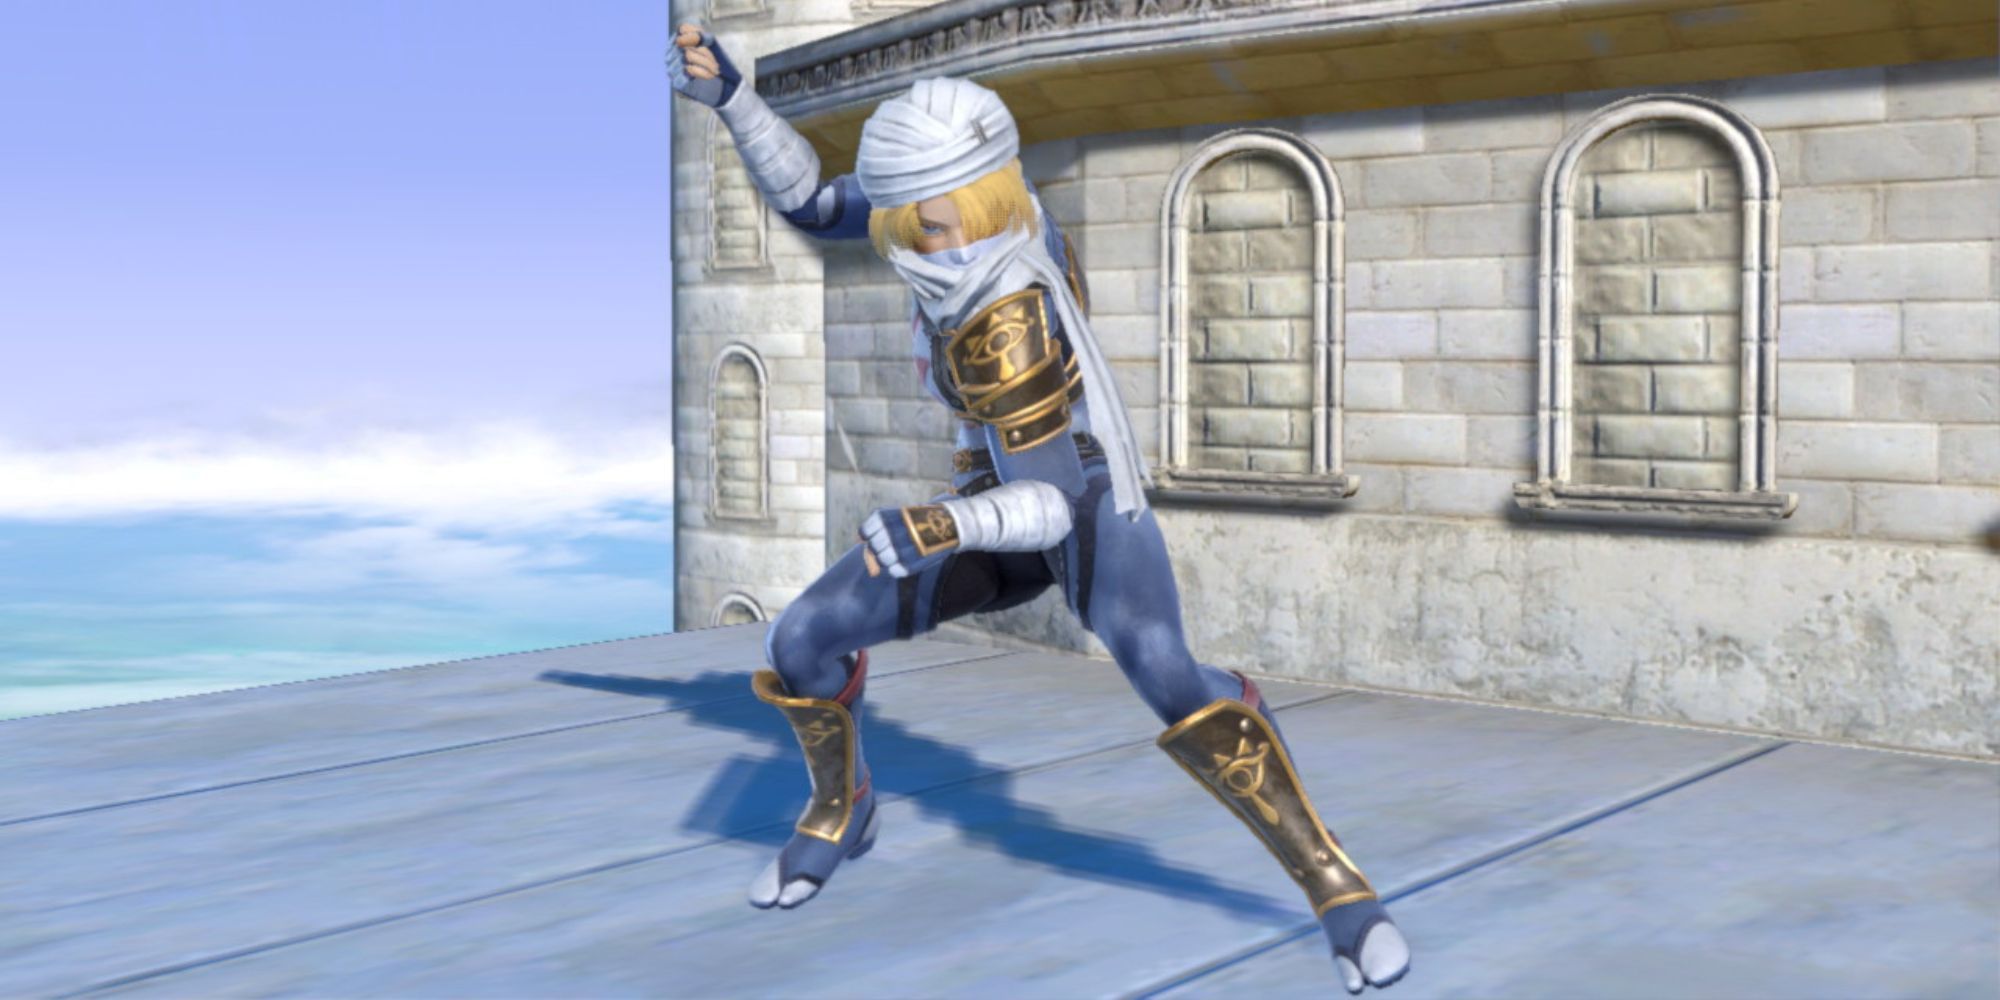 Sheik is holding a tripwire on the temple stage